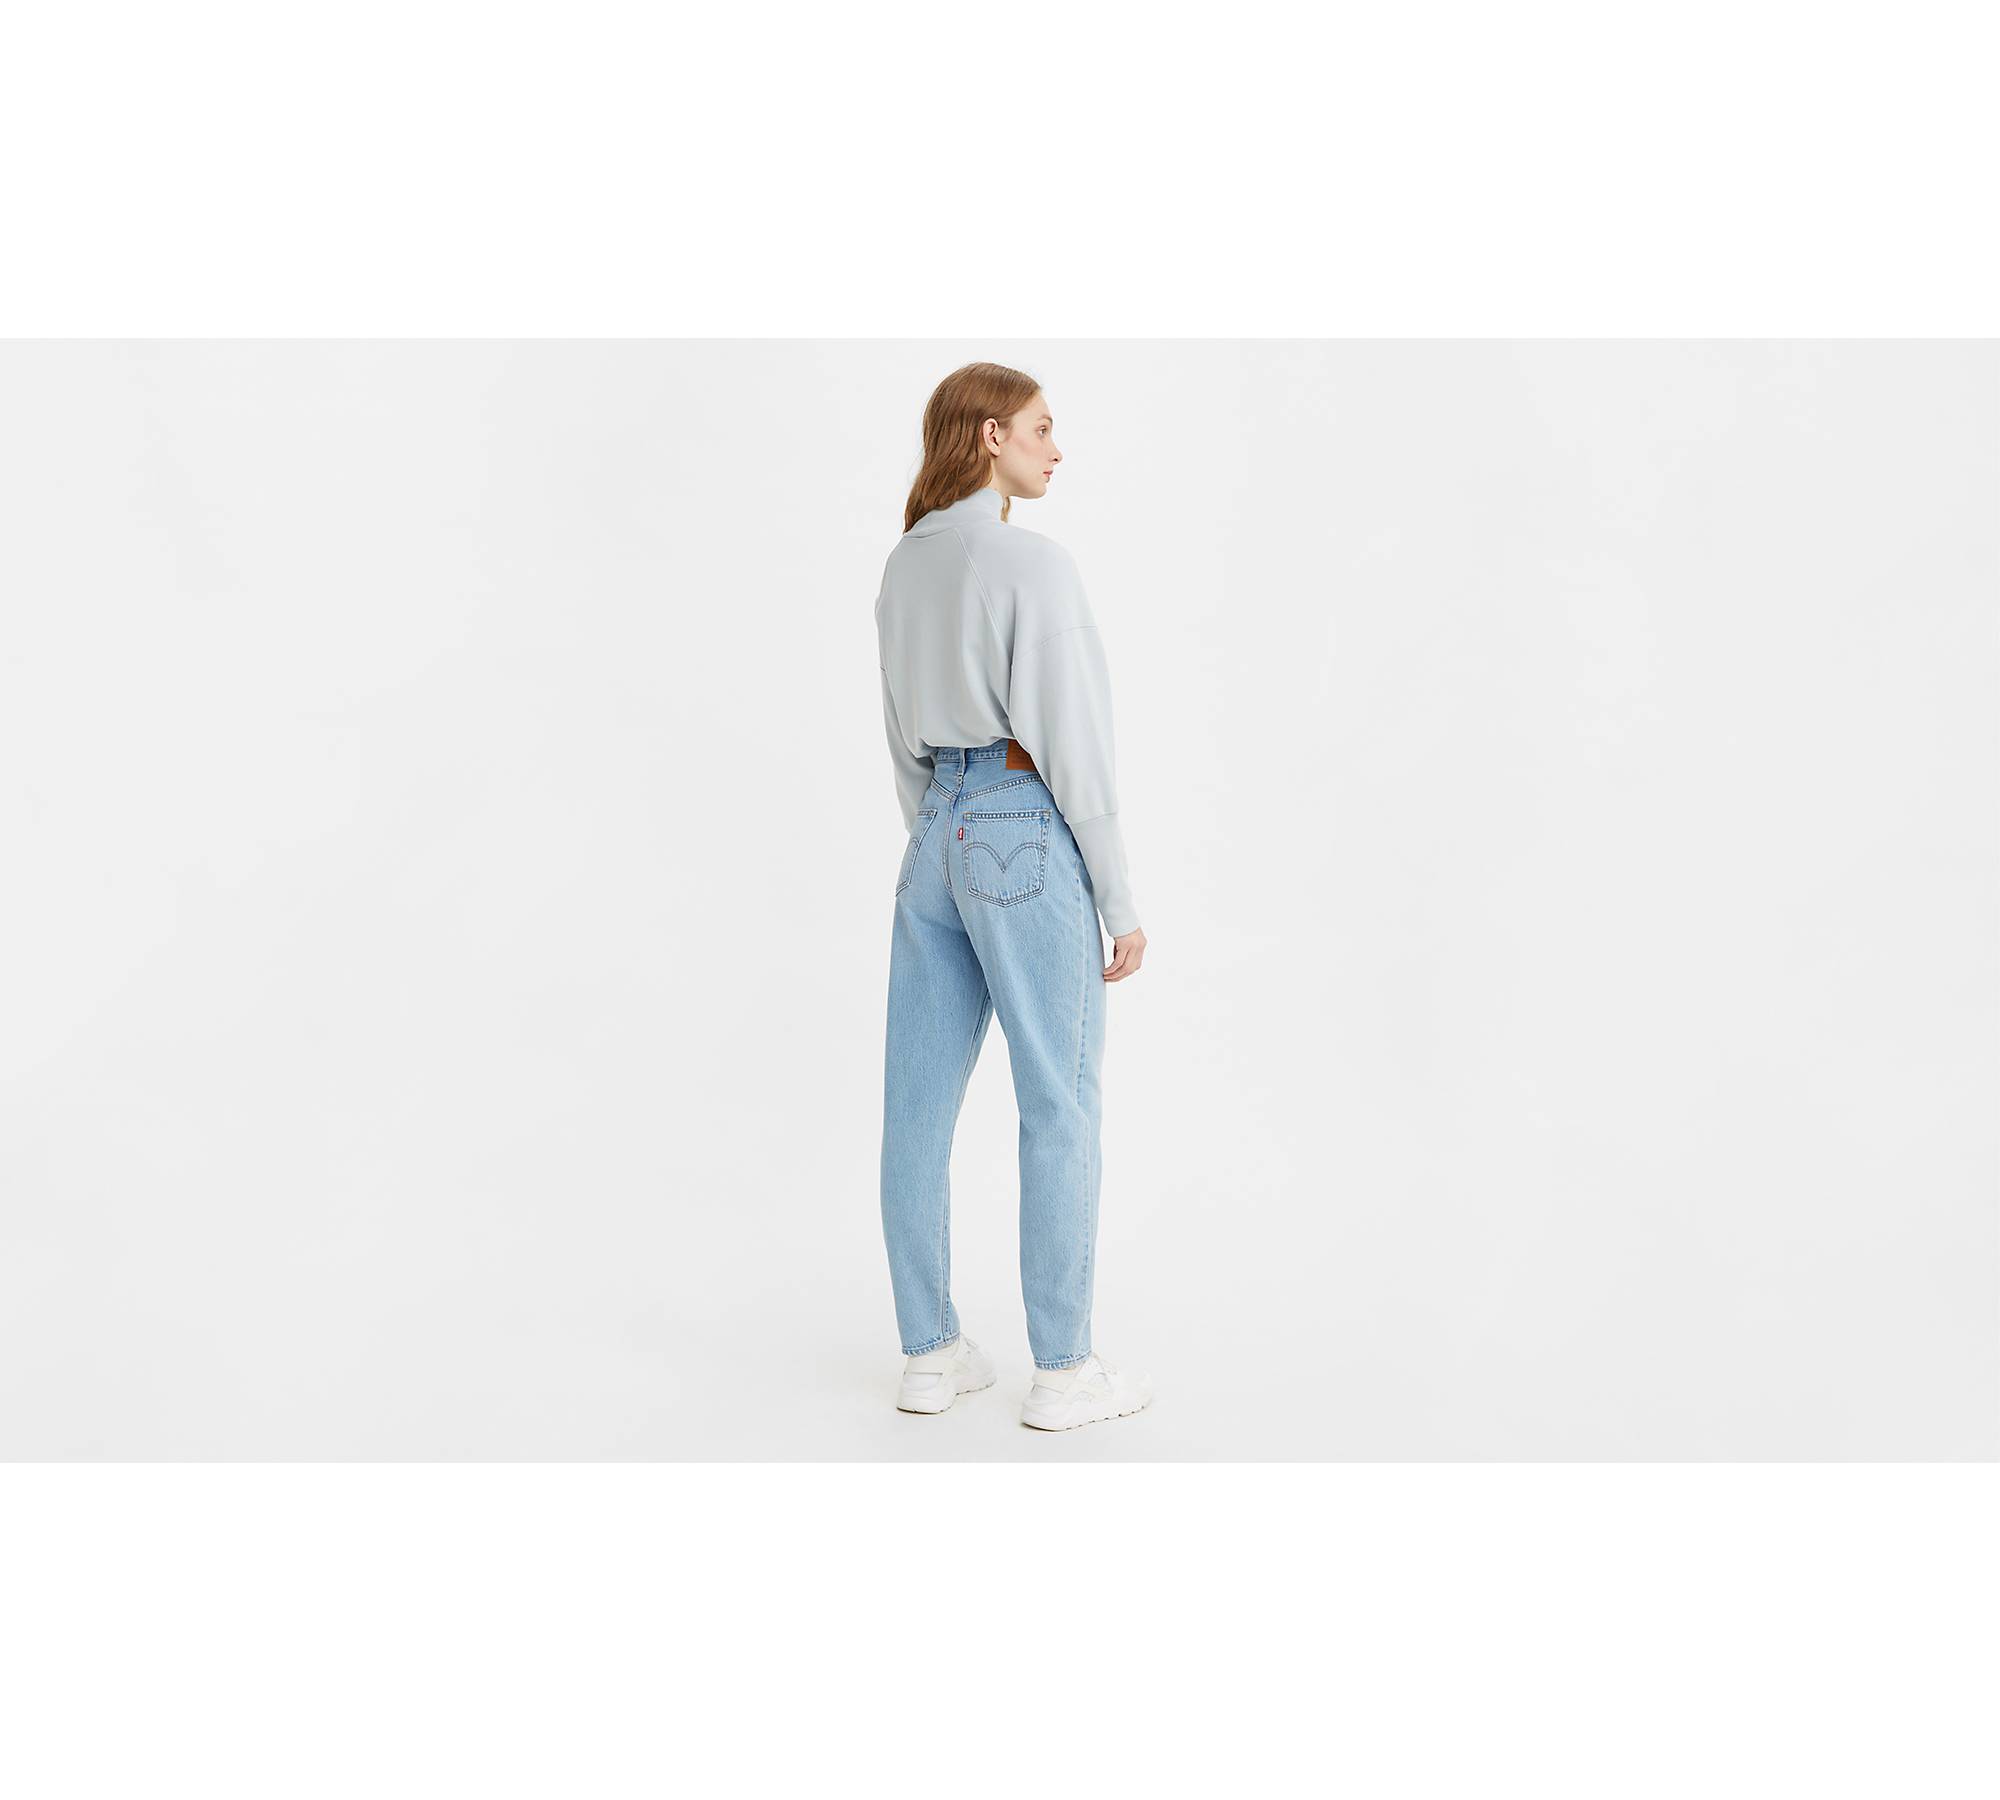 Levi's high waisted mom jeans in light wash blue